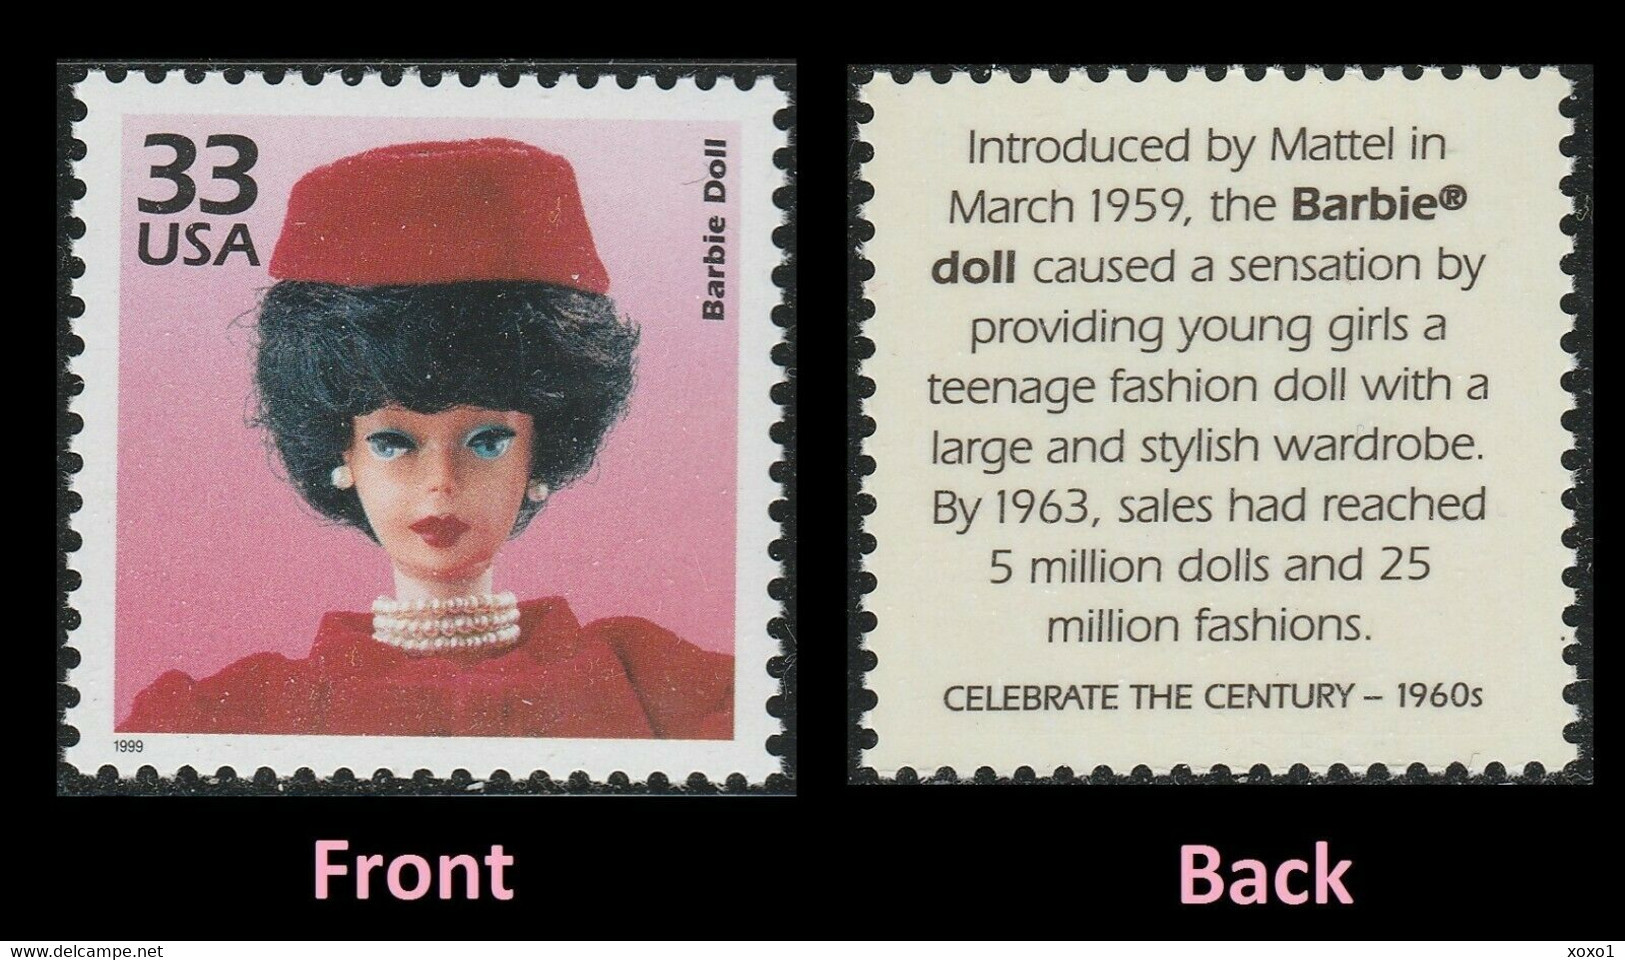 USA 1999 MiNr. 3179 Celebrate The Century 1960s  Childhood & Youth  Barbie Doll 1v MNH ** 0,80 € - Puppen